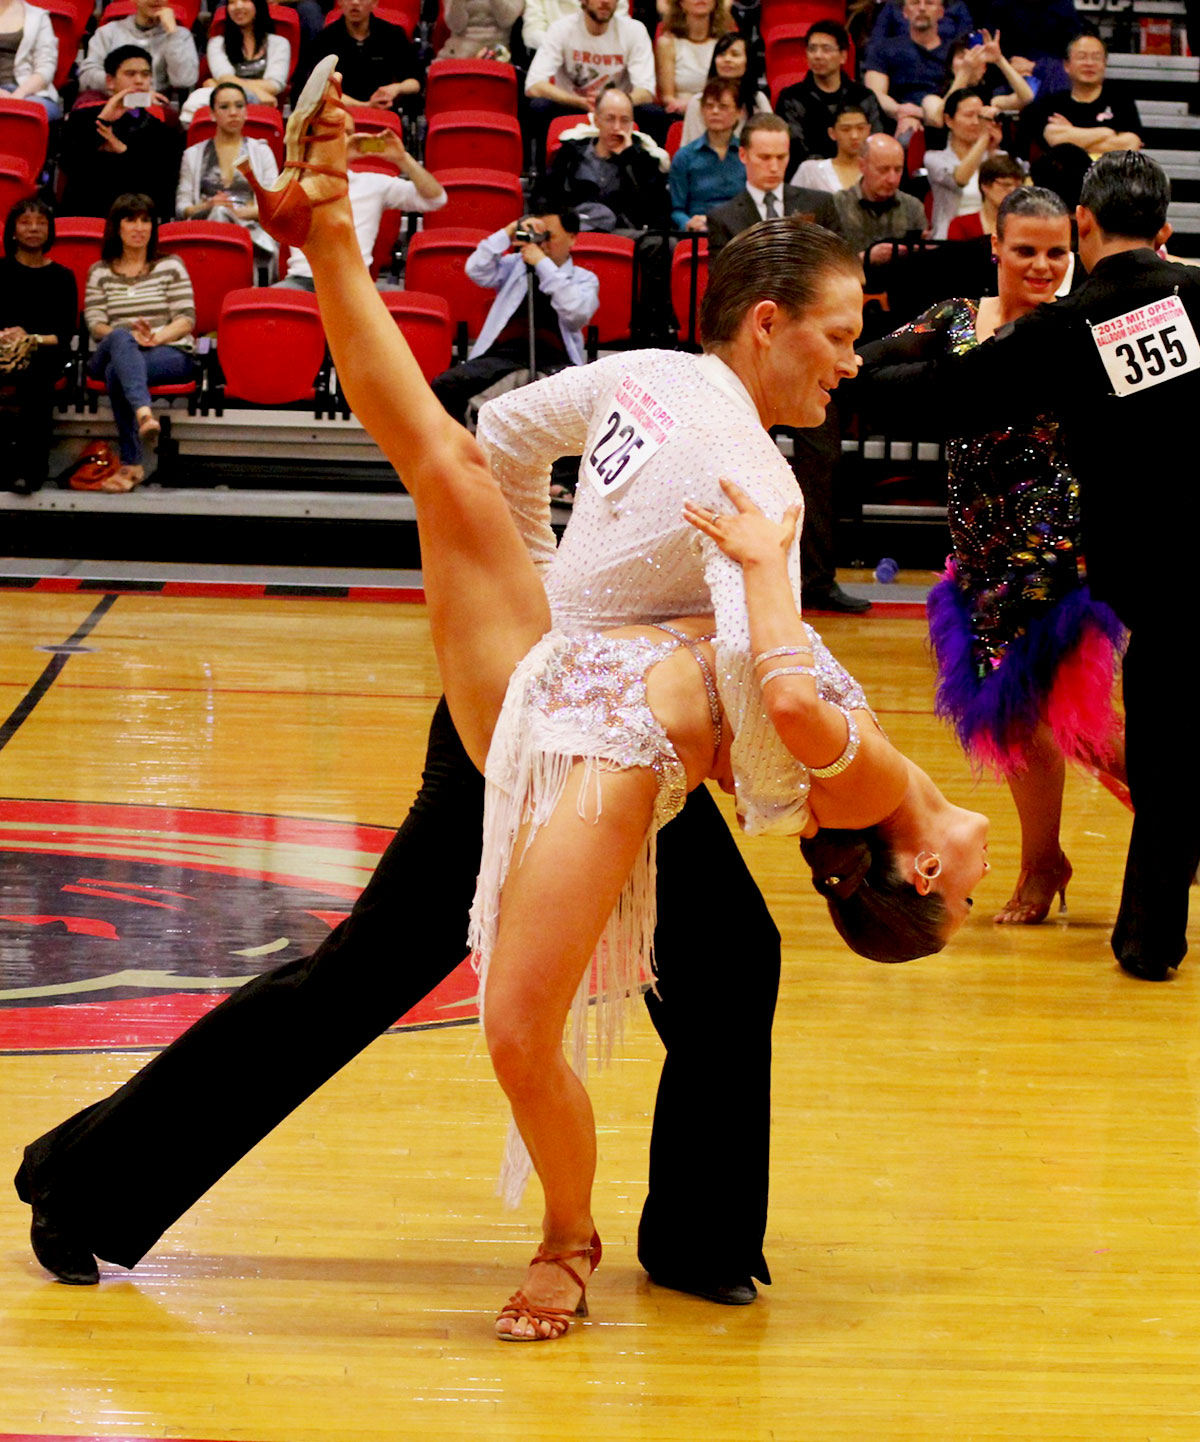 MIT's 18th Annual Open Ballroom Dance Competition